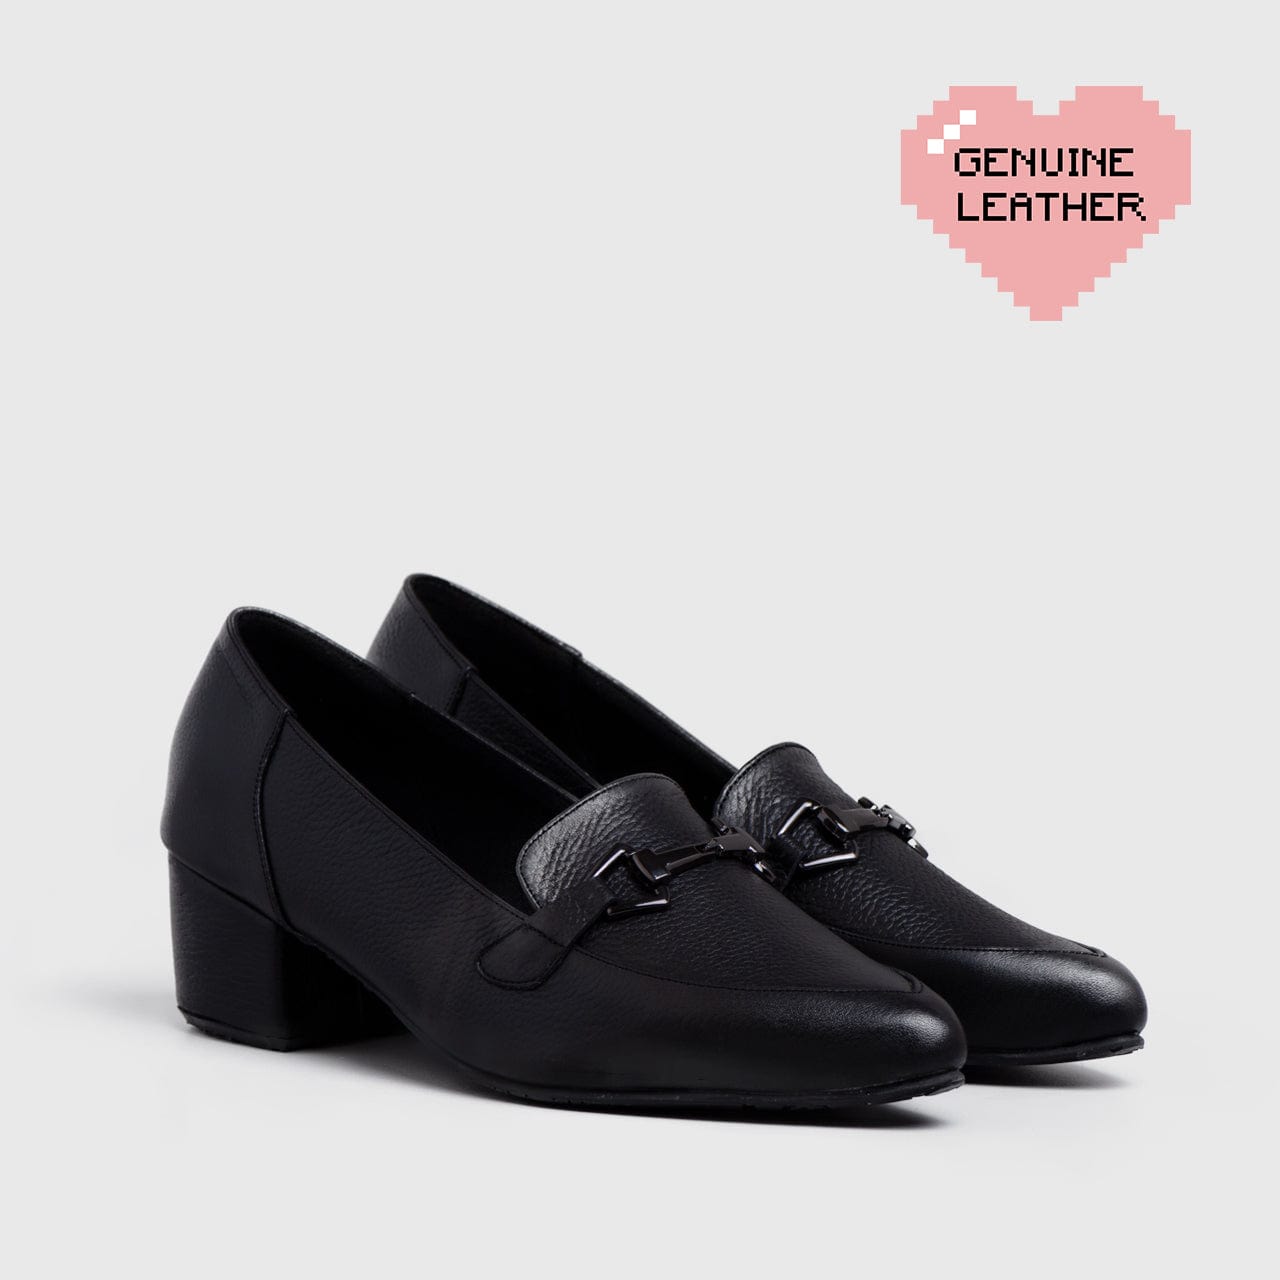 Adorable Projects Official 35 Mulligan Heels Genuine Leather Black